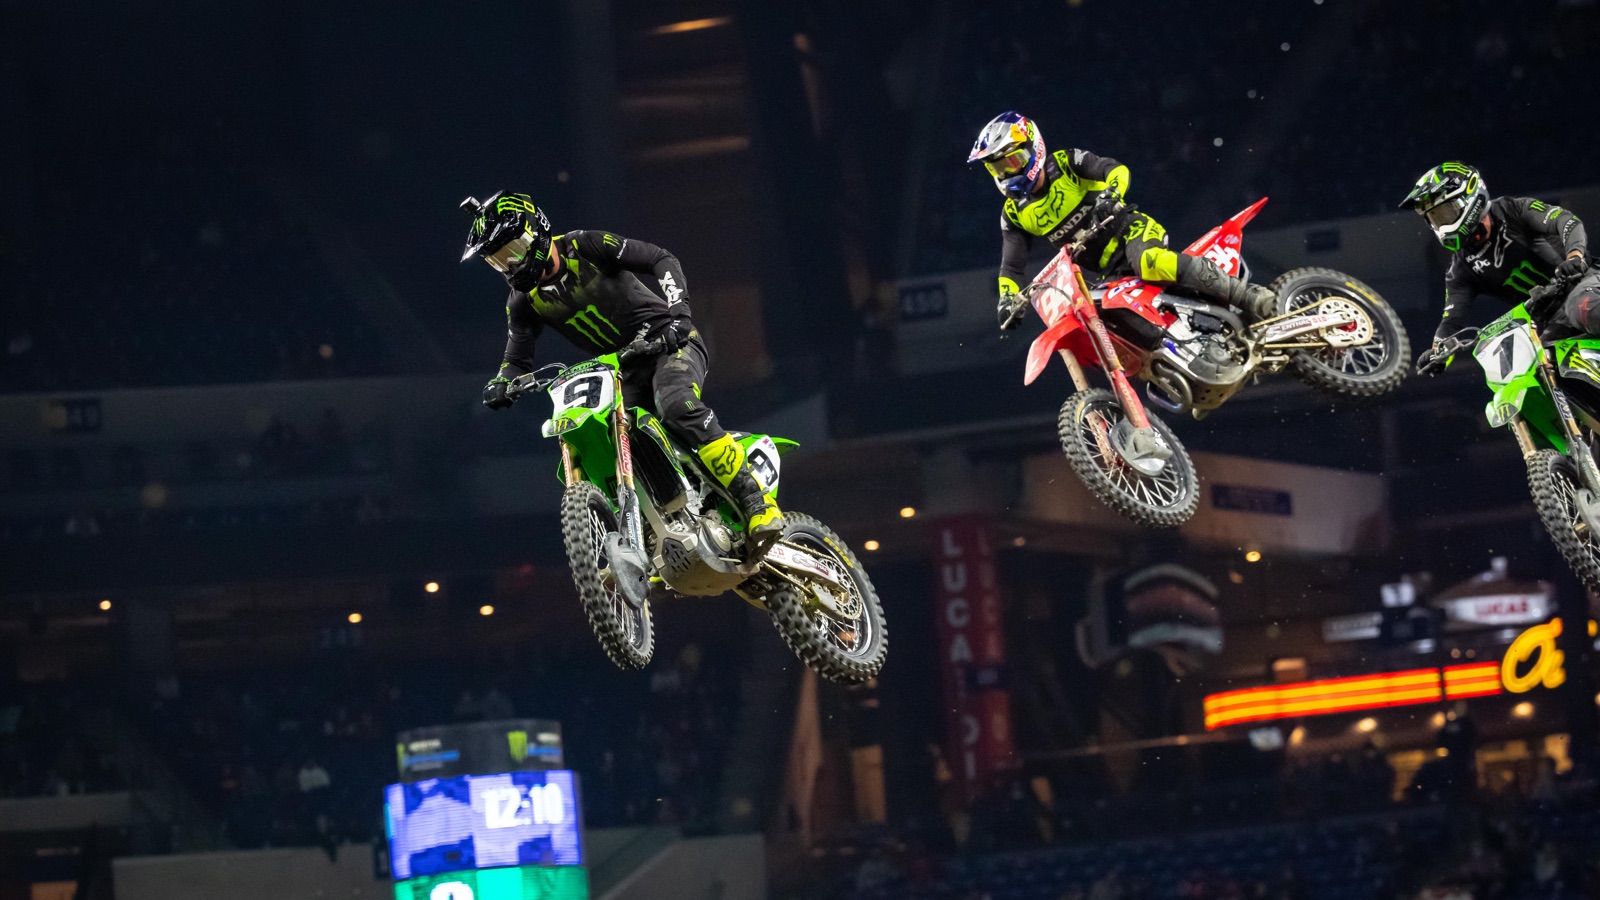 Ken Roczen (#94) was on a mission to win in Indy. 